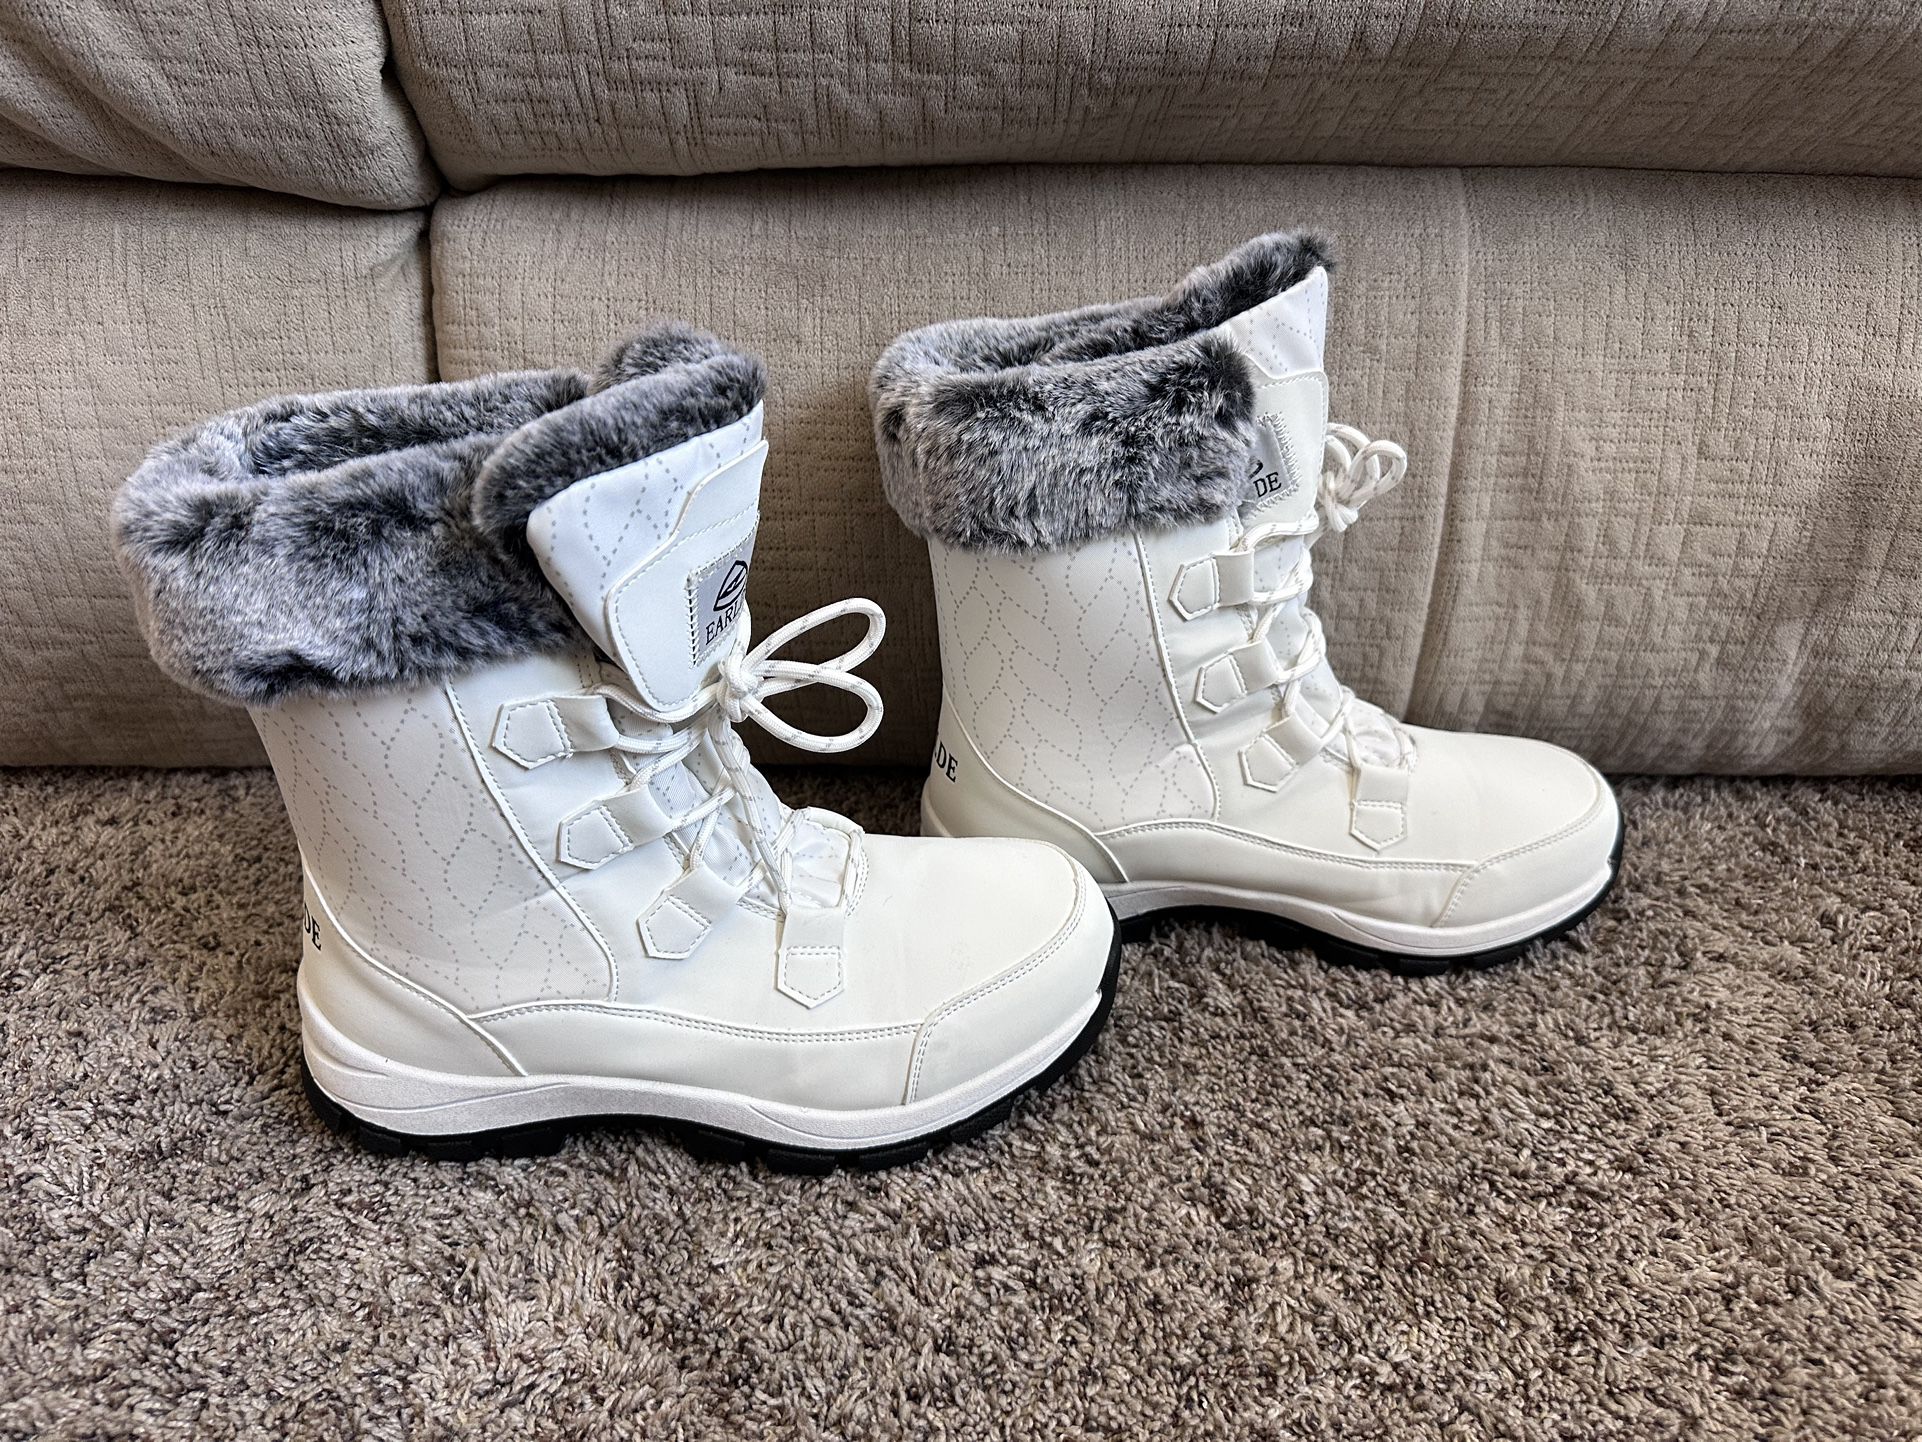 New Women's Size 9 Snow Boots